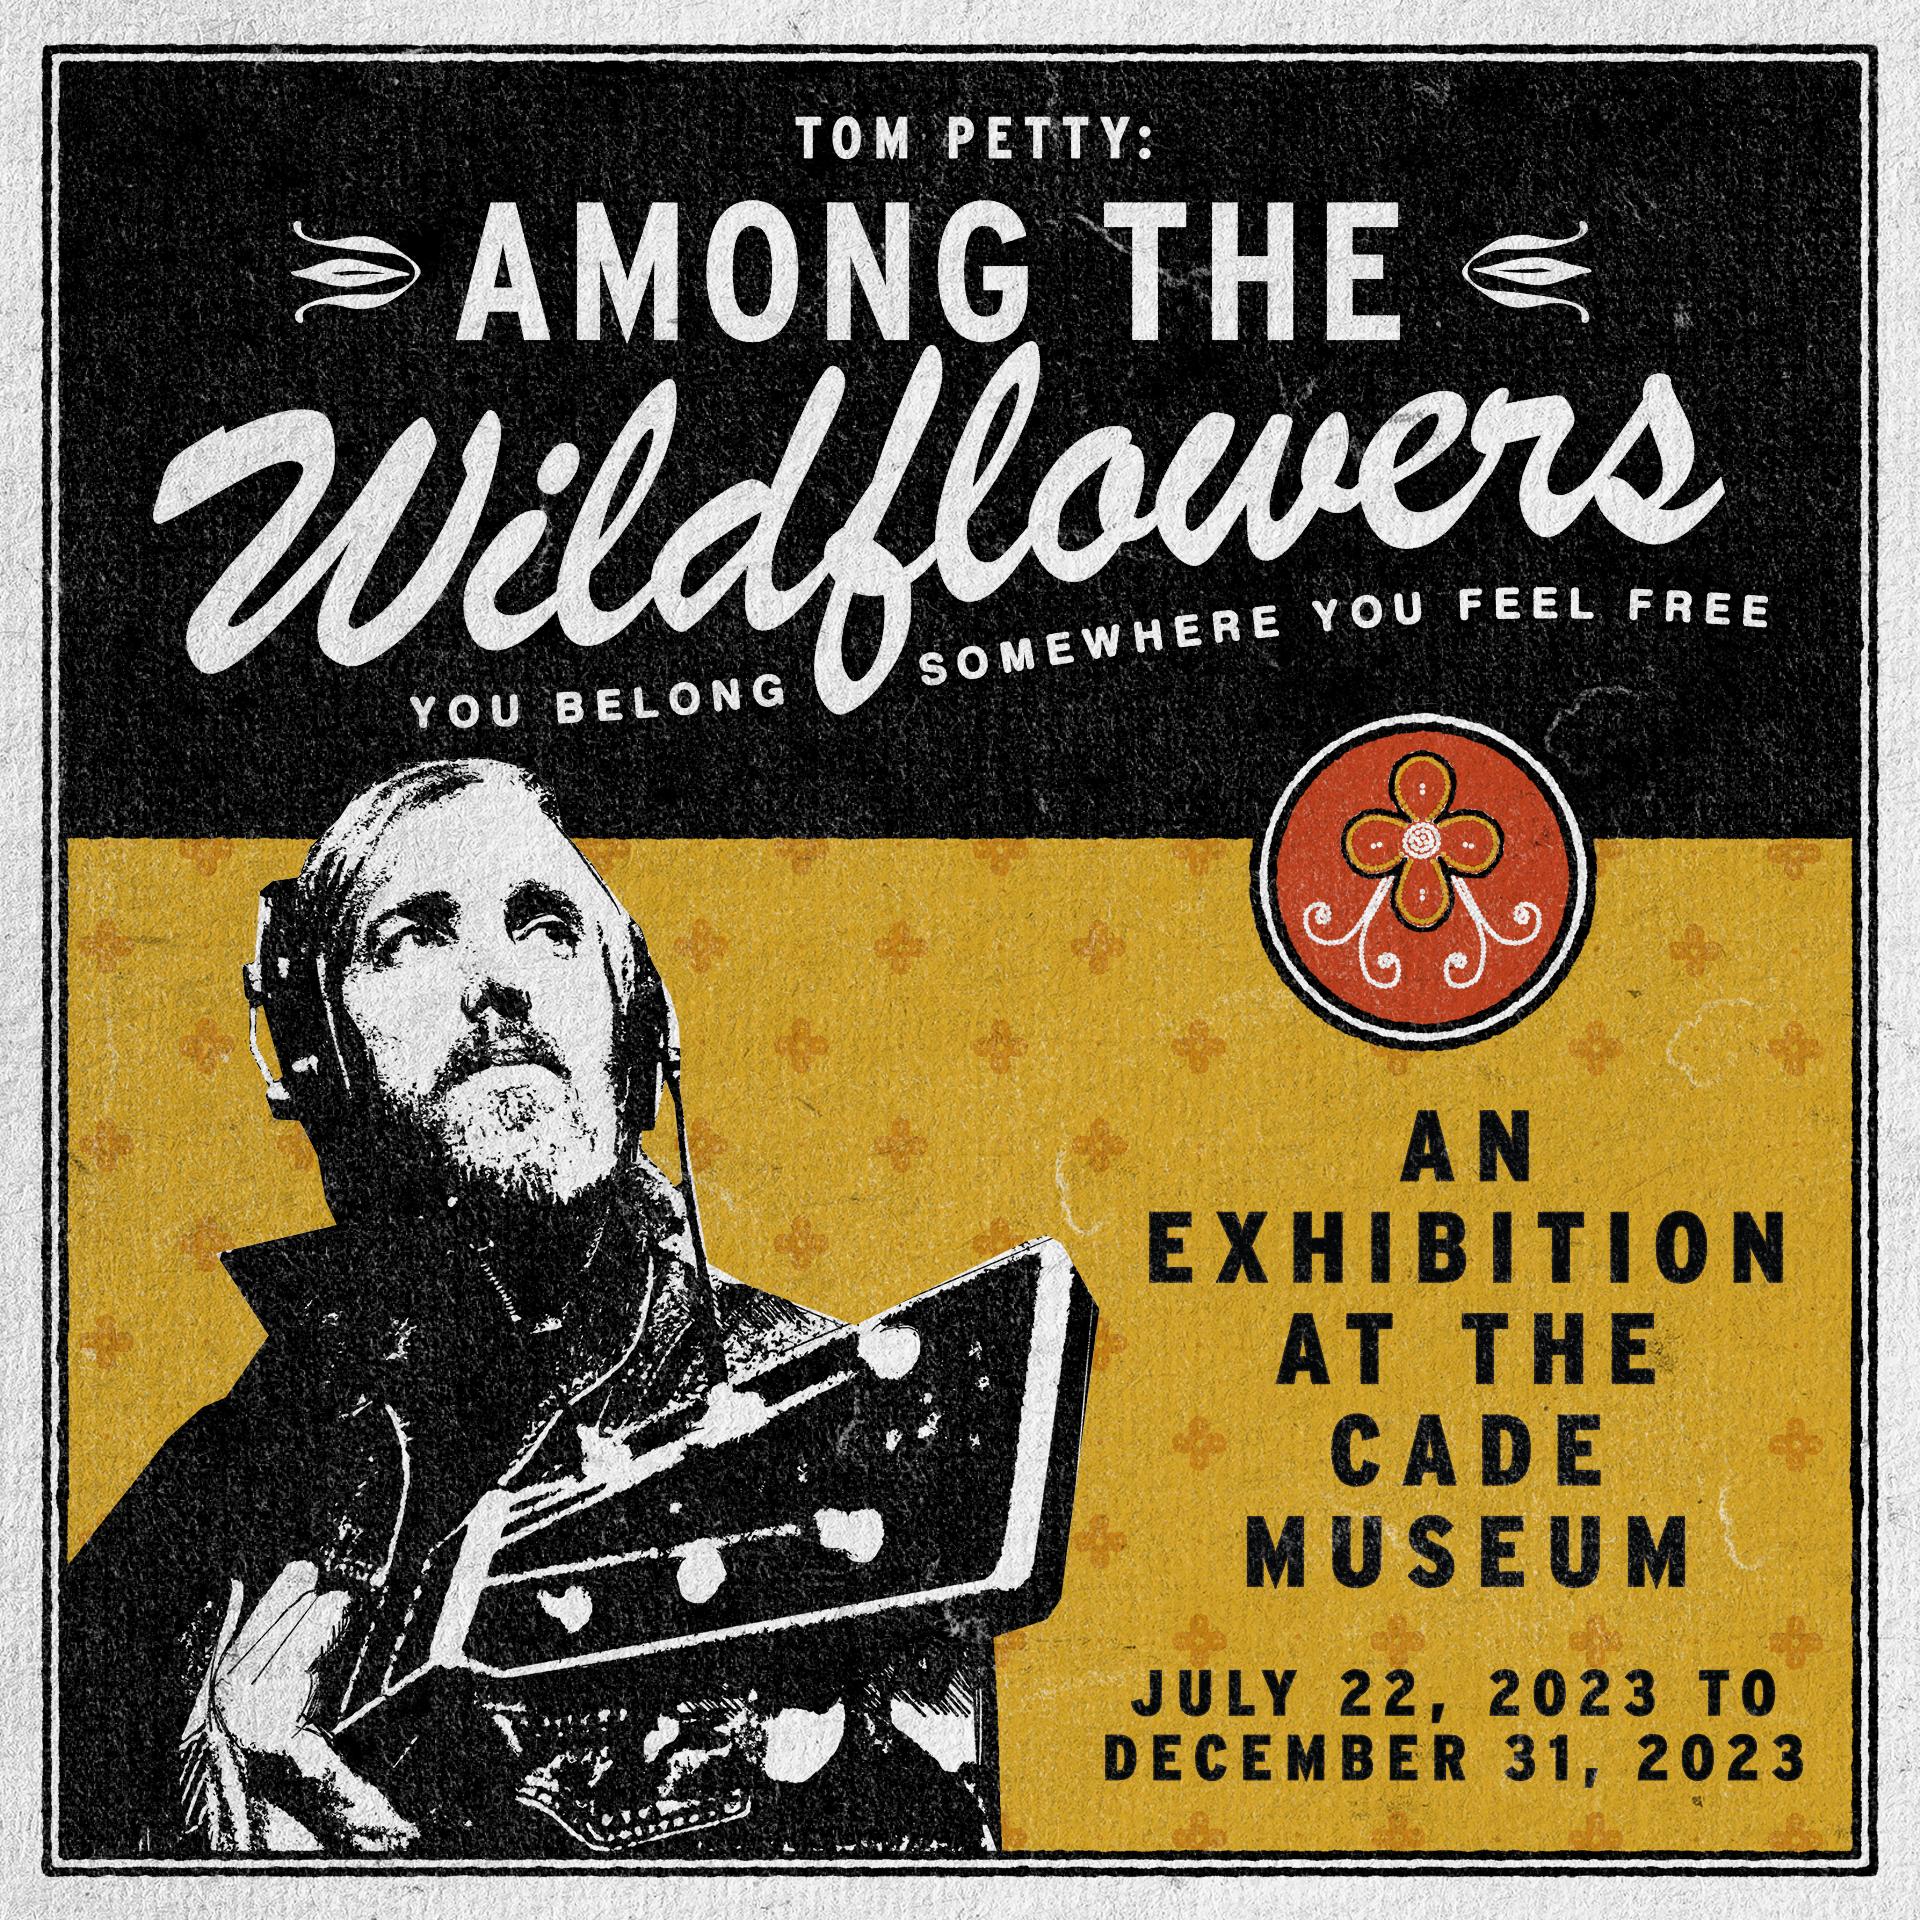 Tom Petty: Among the Wildflowers July 22, 2023 to December 31, 2023